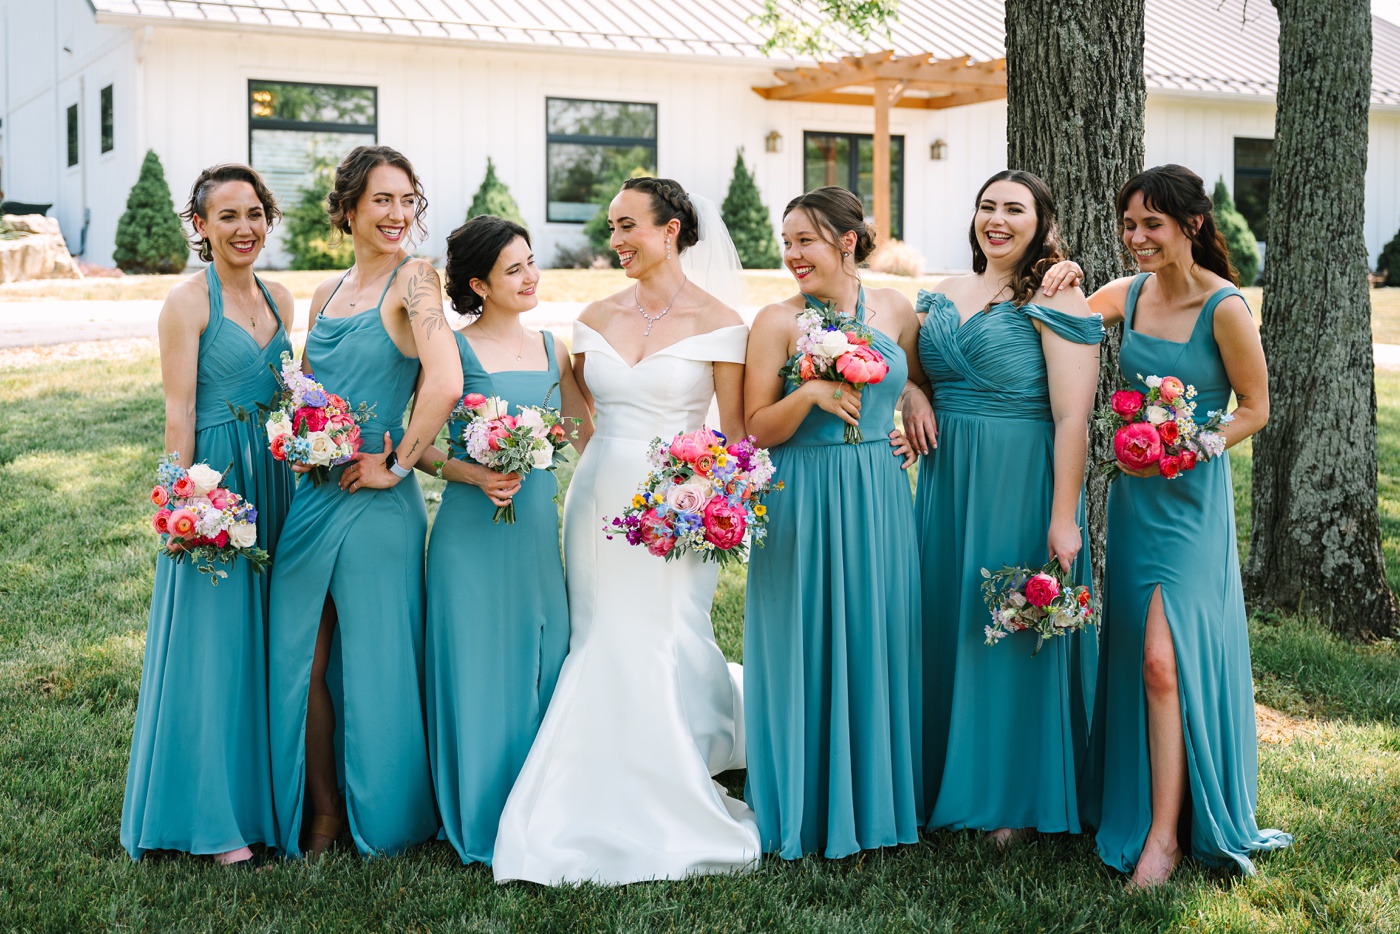 Bridal party portraits at The Wilds